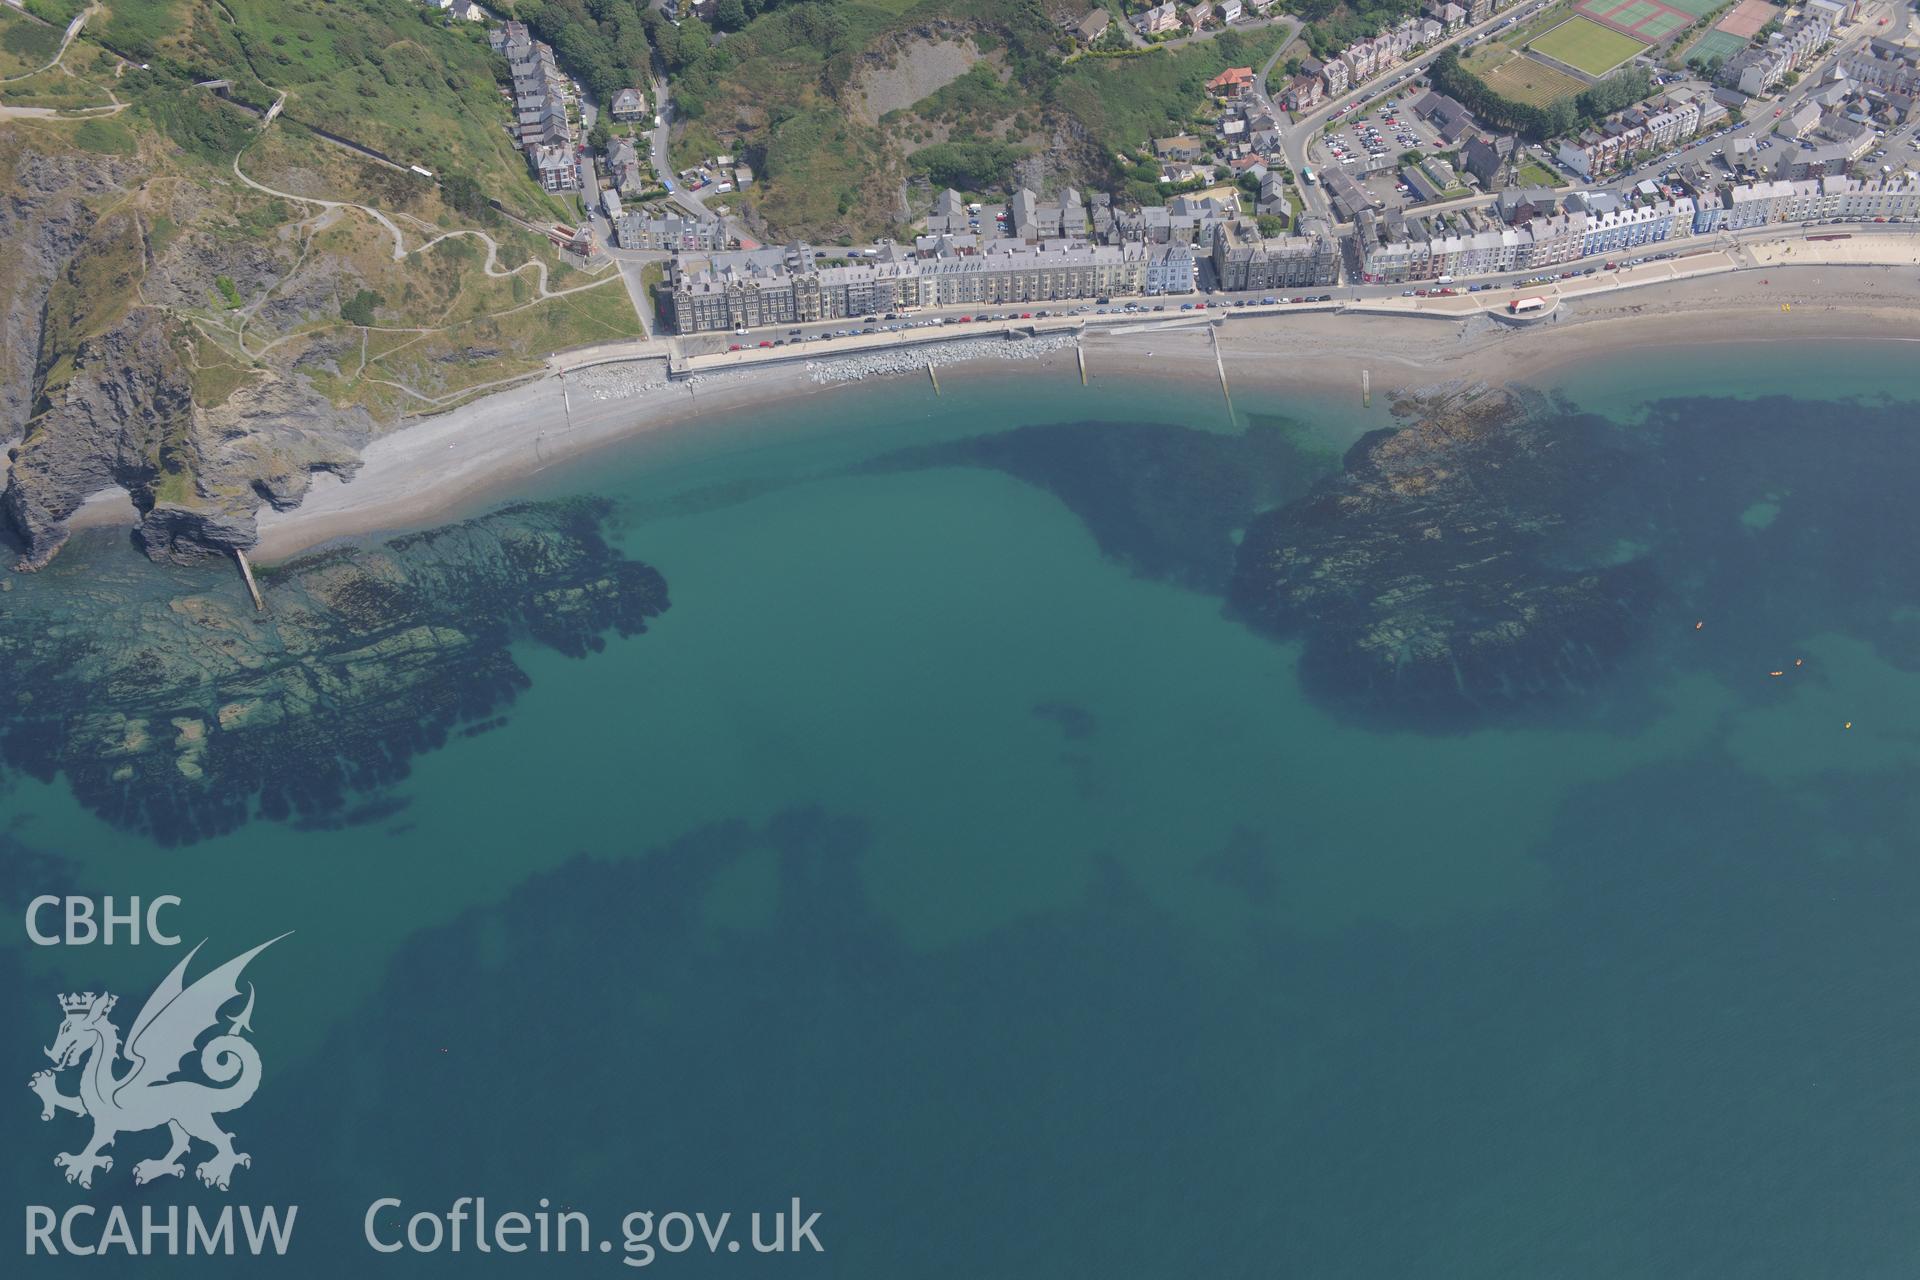 View of Aberystwyth including Promenade, Victoria Terrace, Alexandra Hall of Residence and the old County Hall. Oblique aerial photograph taken during Royal Commission?s programme of archaeological aerial reconnaissance by Toby Driver on 12th July 2013.